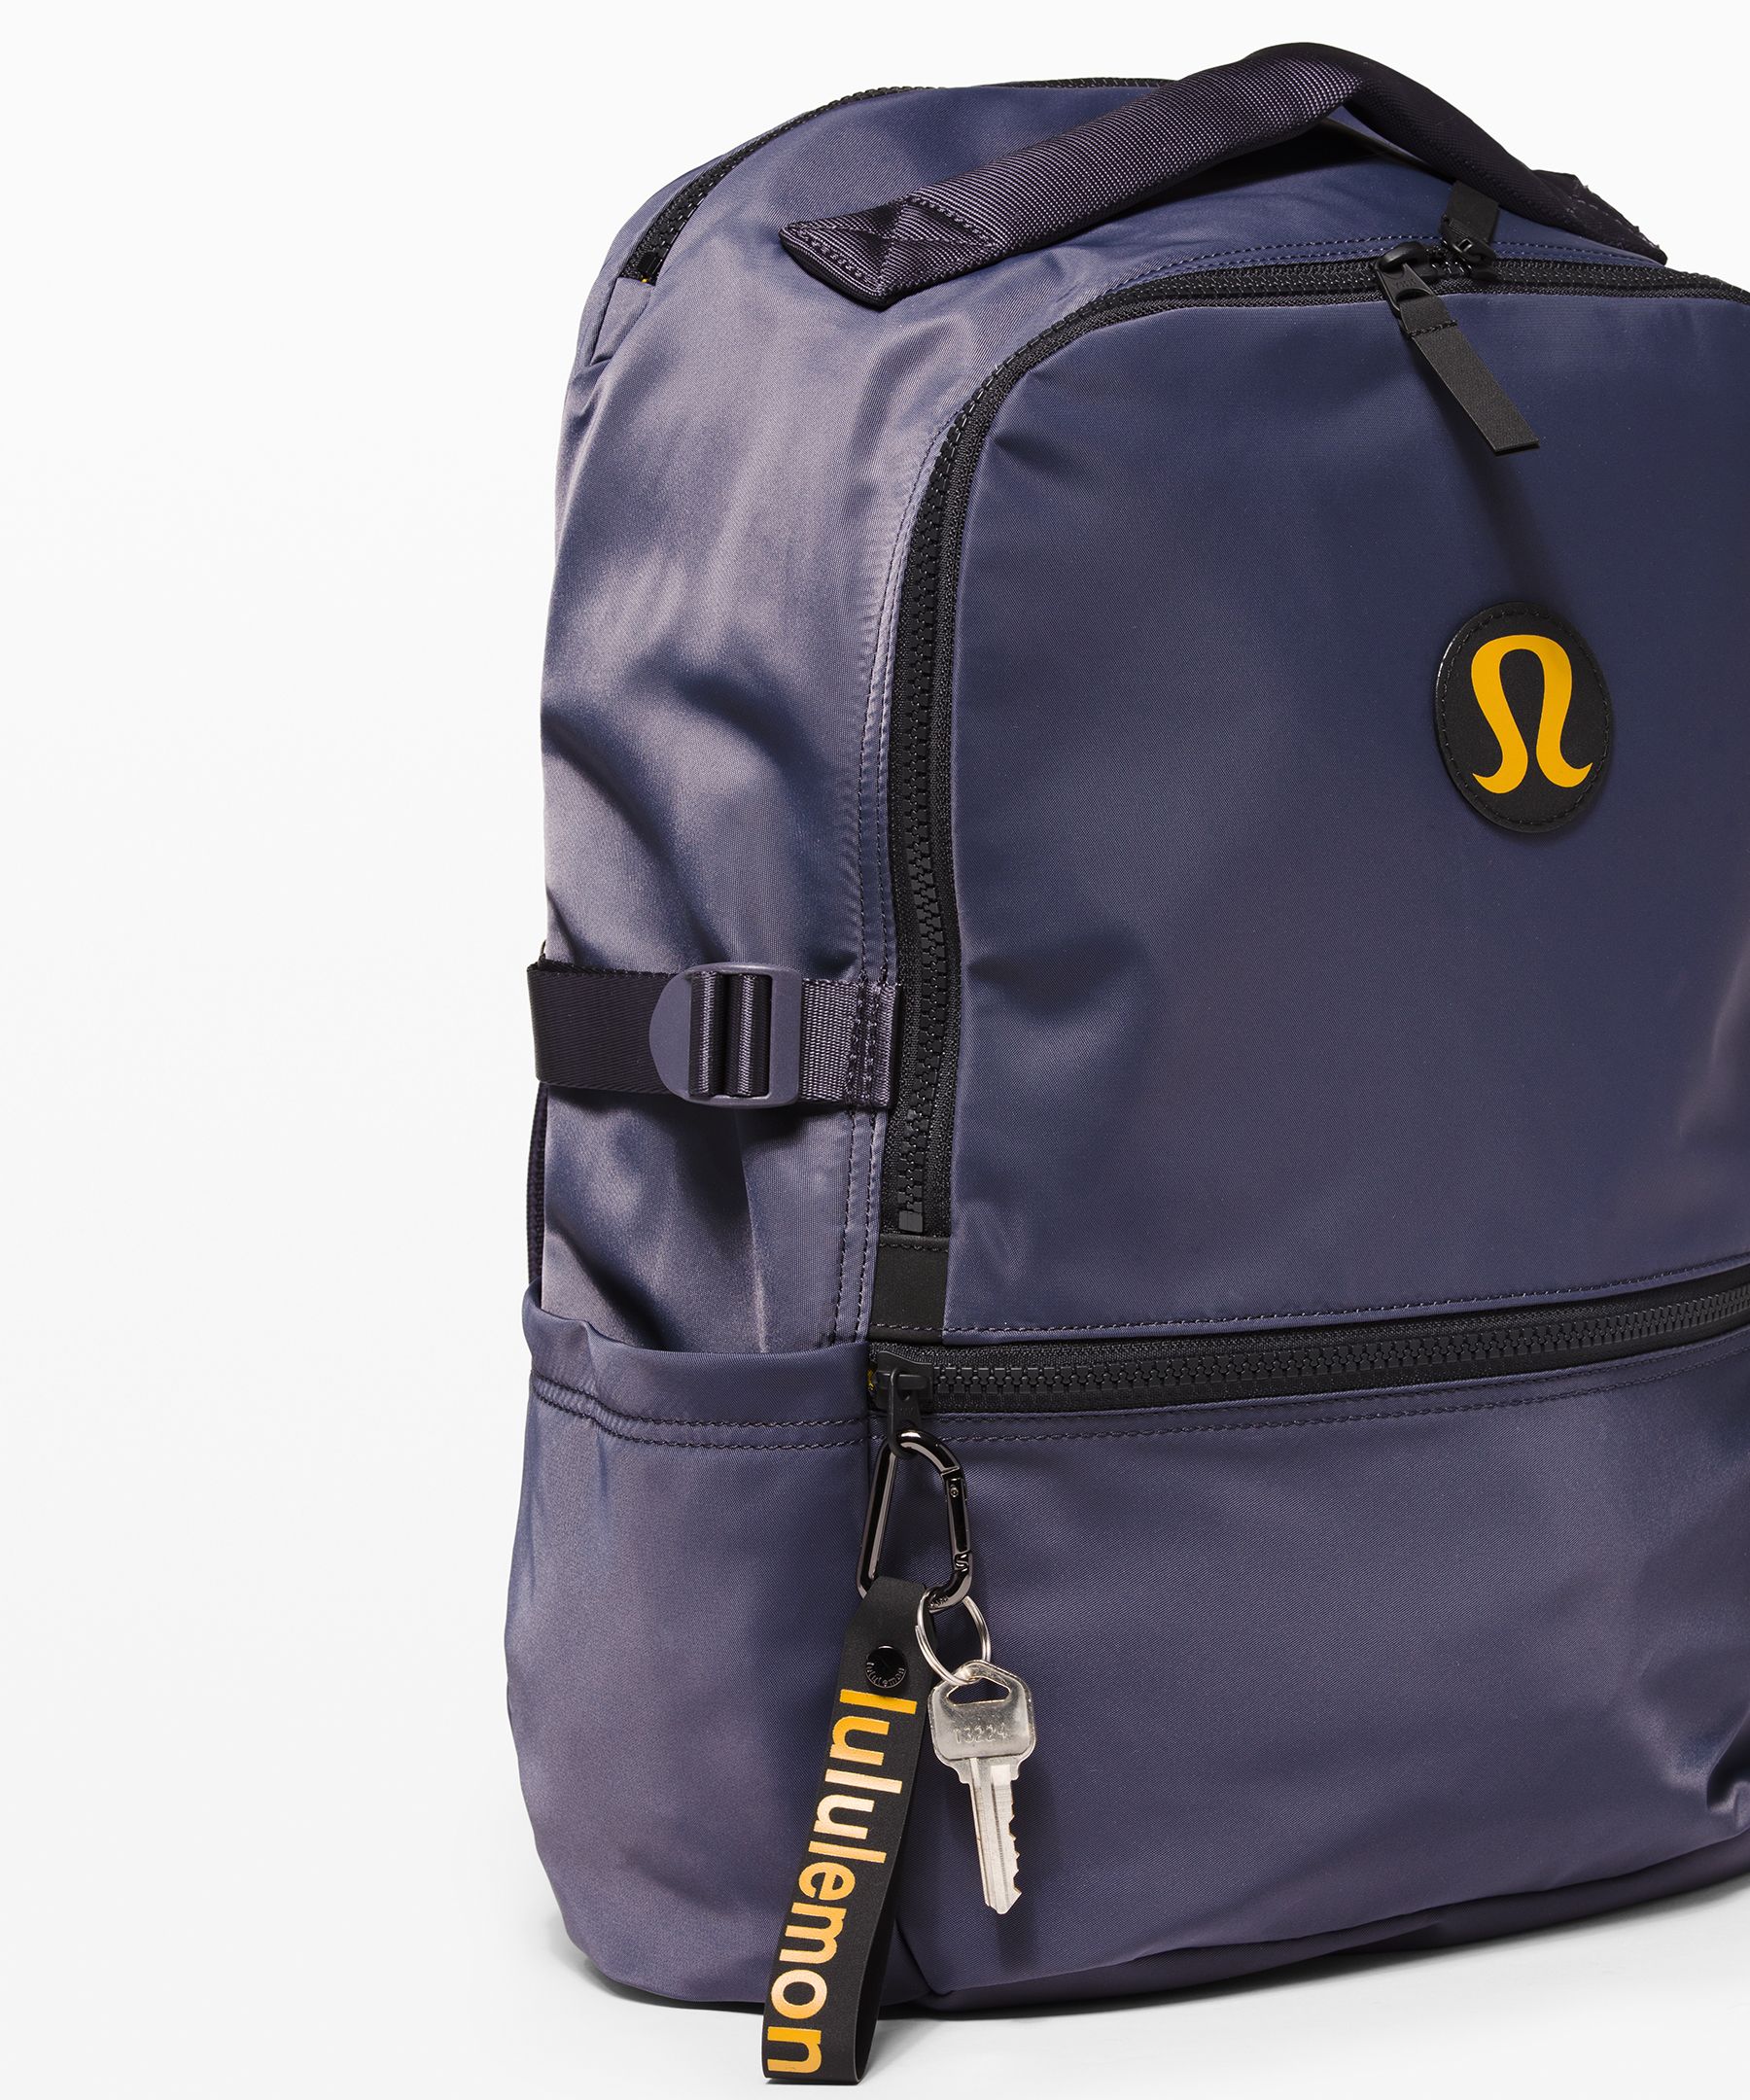 lululemon new crew backpack review